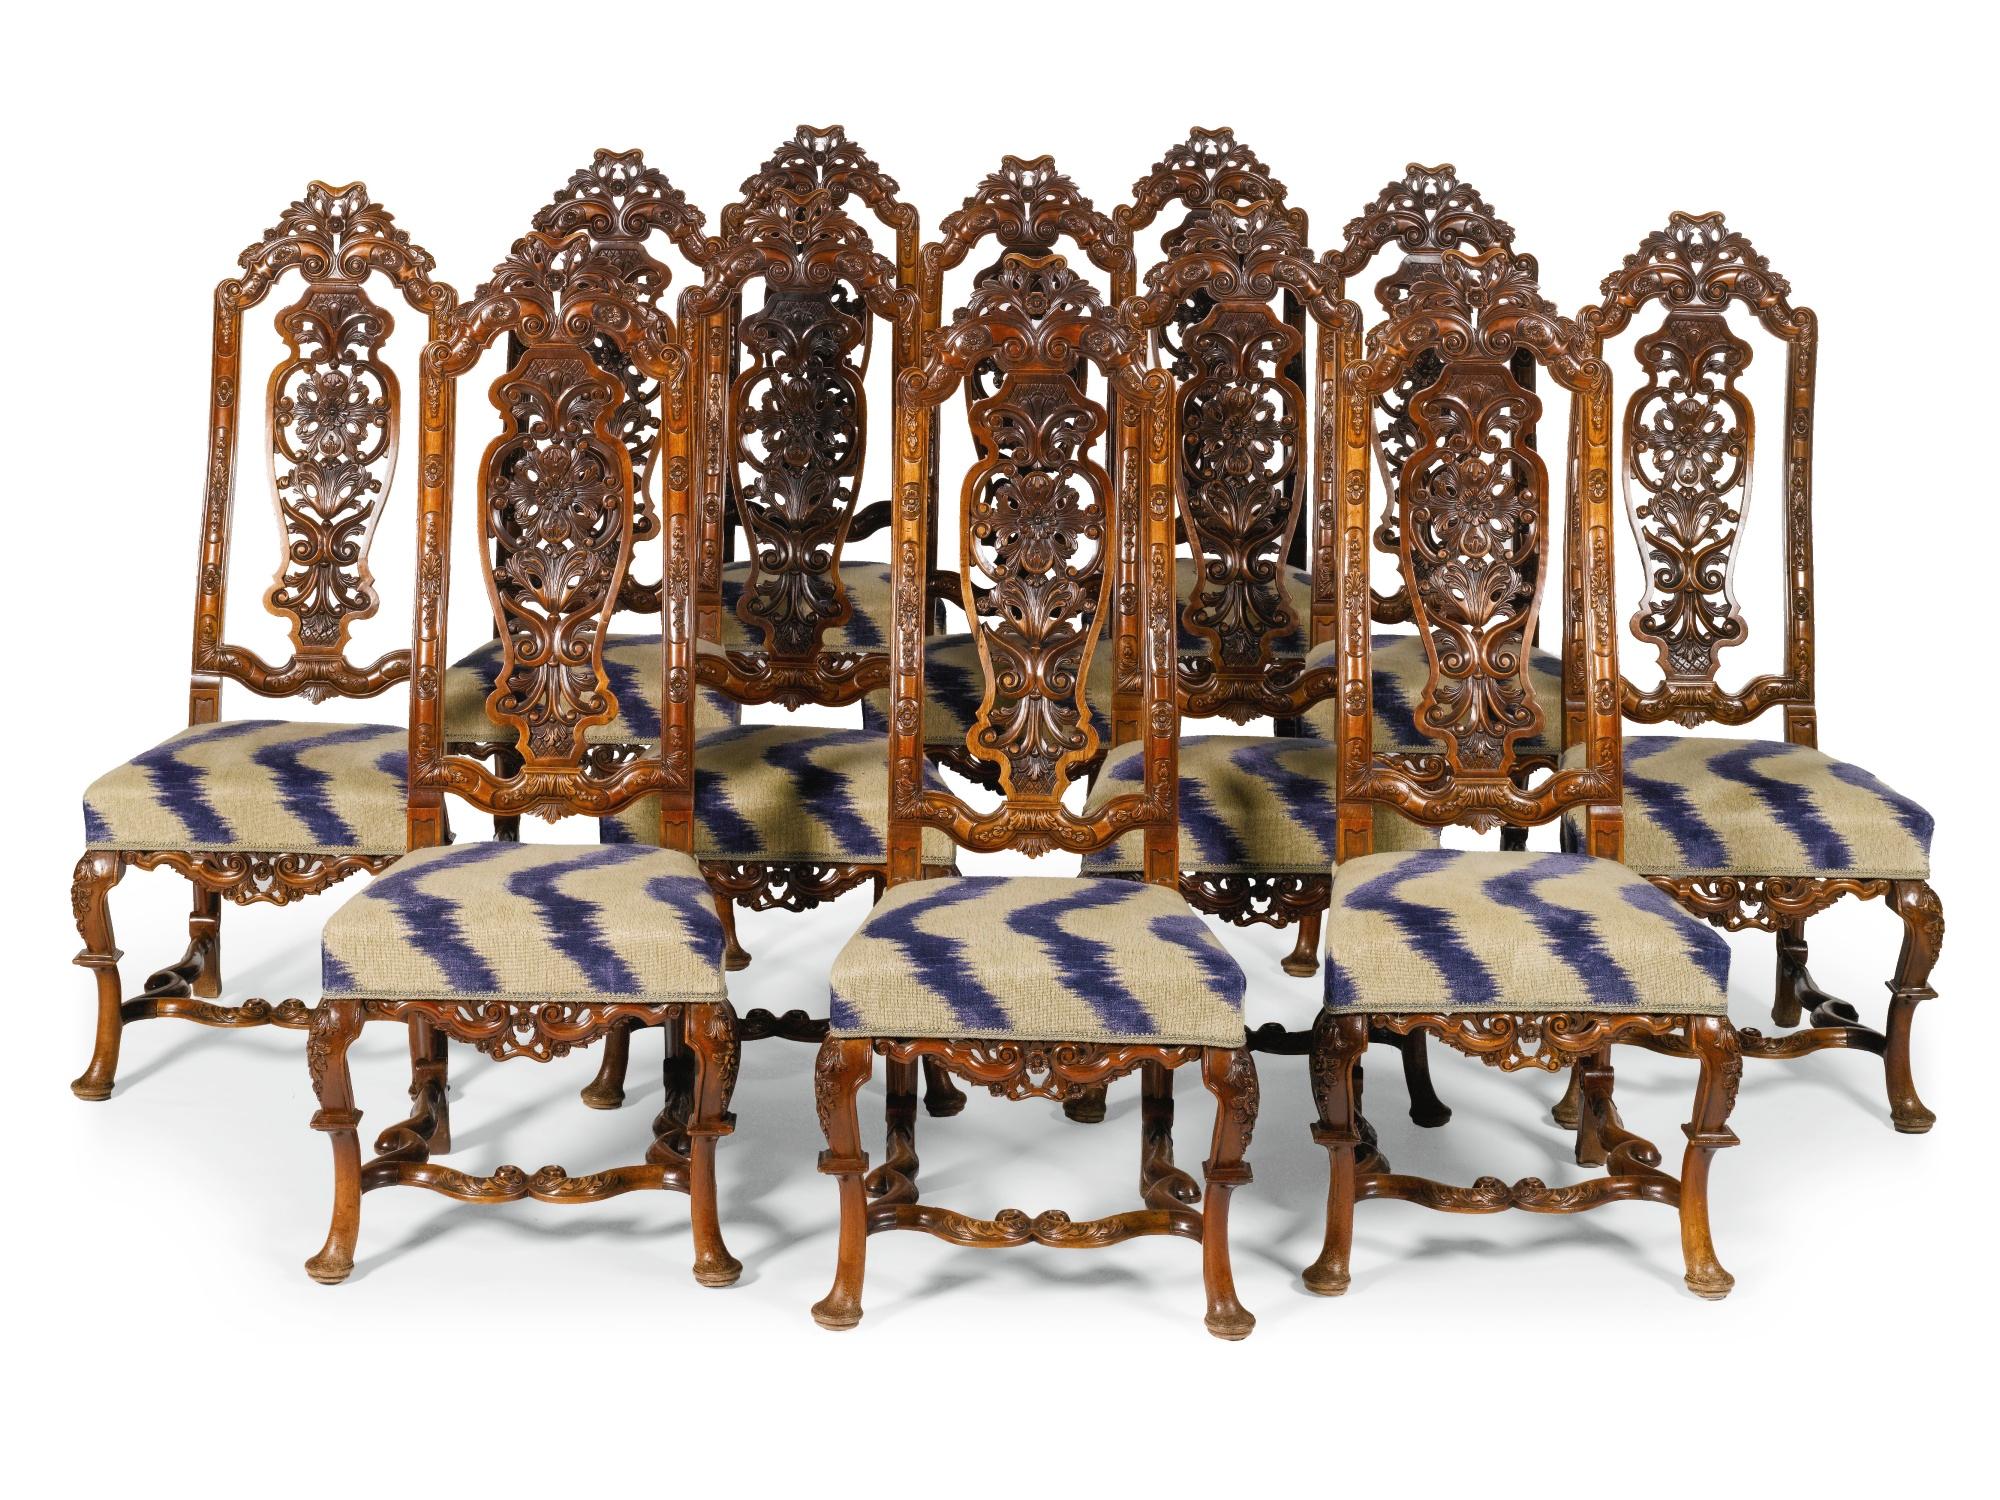 The high backs have carved and shaped top rails with double scrolls surmounted by open and pierced sprays of acanthus leaves and rosettes. The side rails to the backs are carved with panels set with rosettes flanked by husk drapery. The seats are